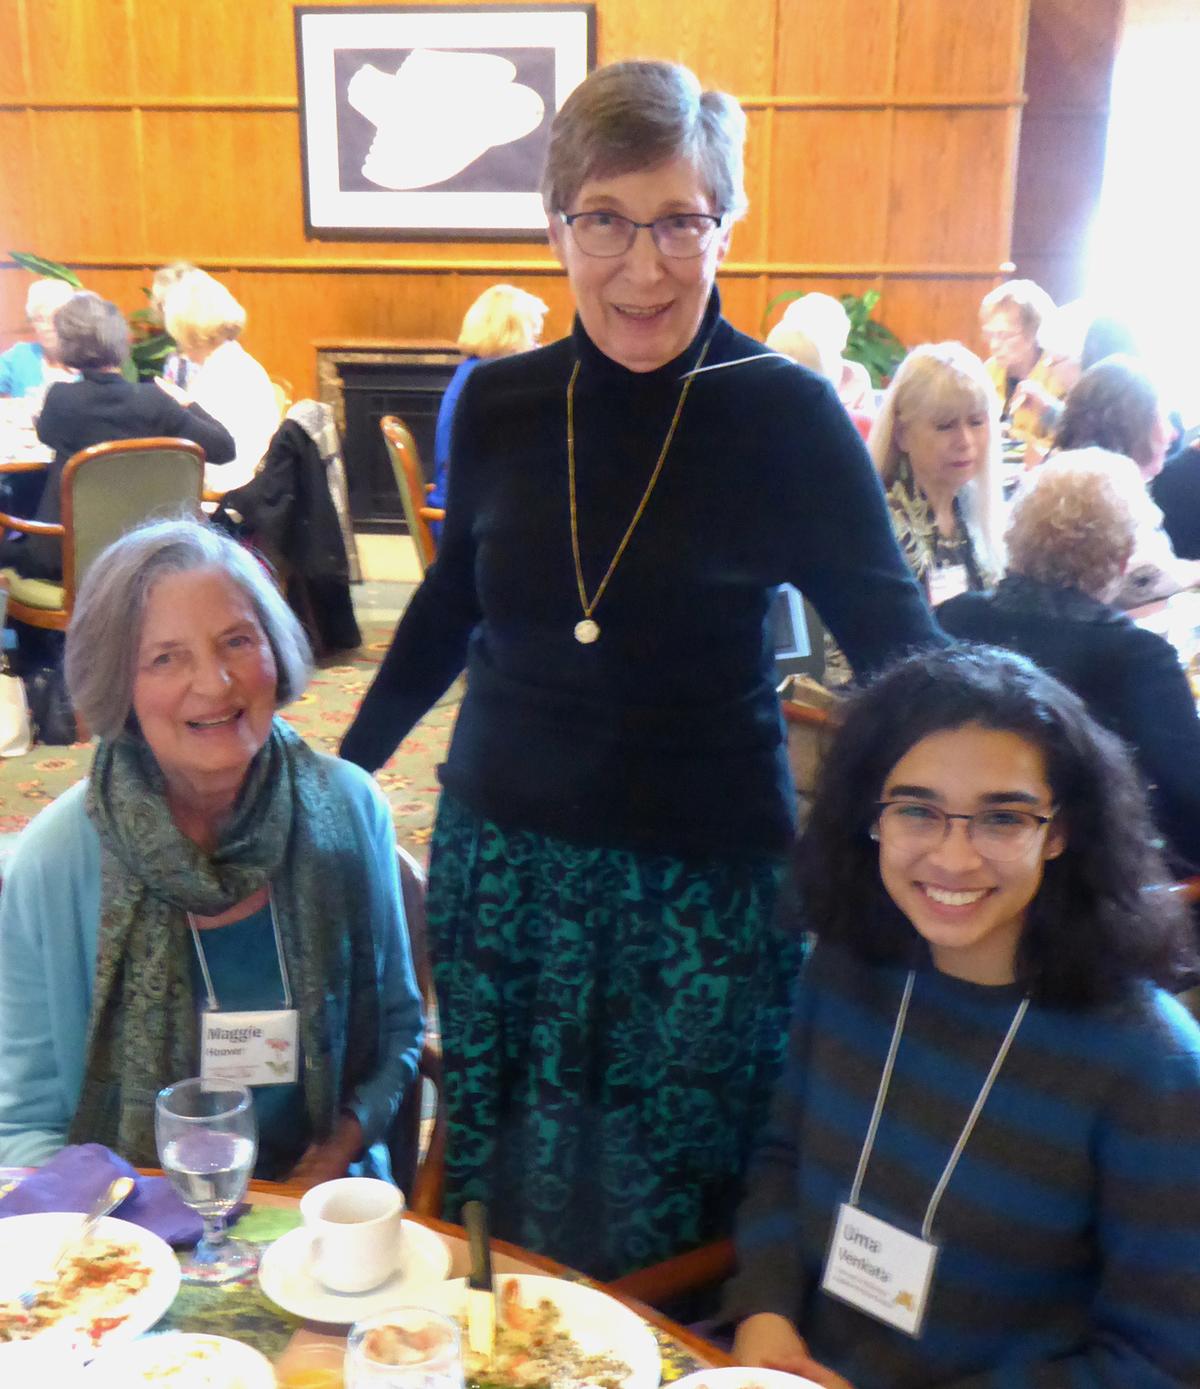 Women's club members at a luncheon program pose for a photo